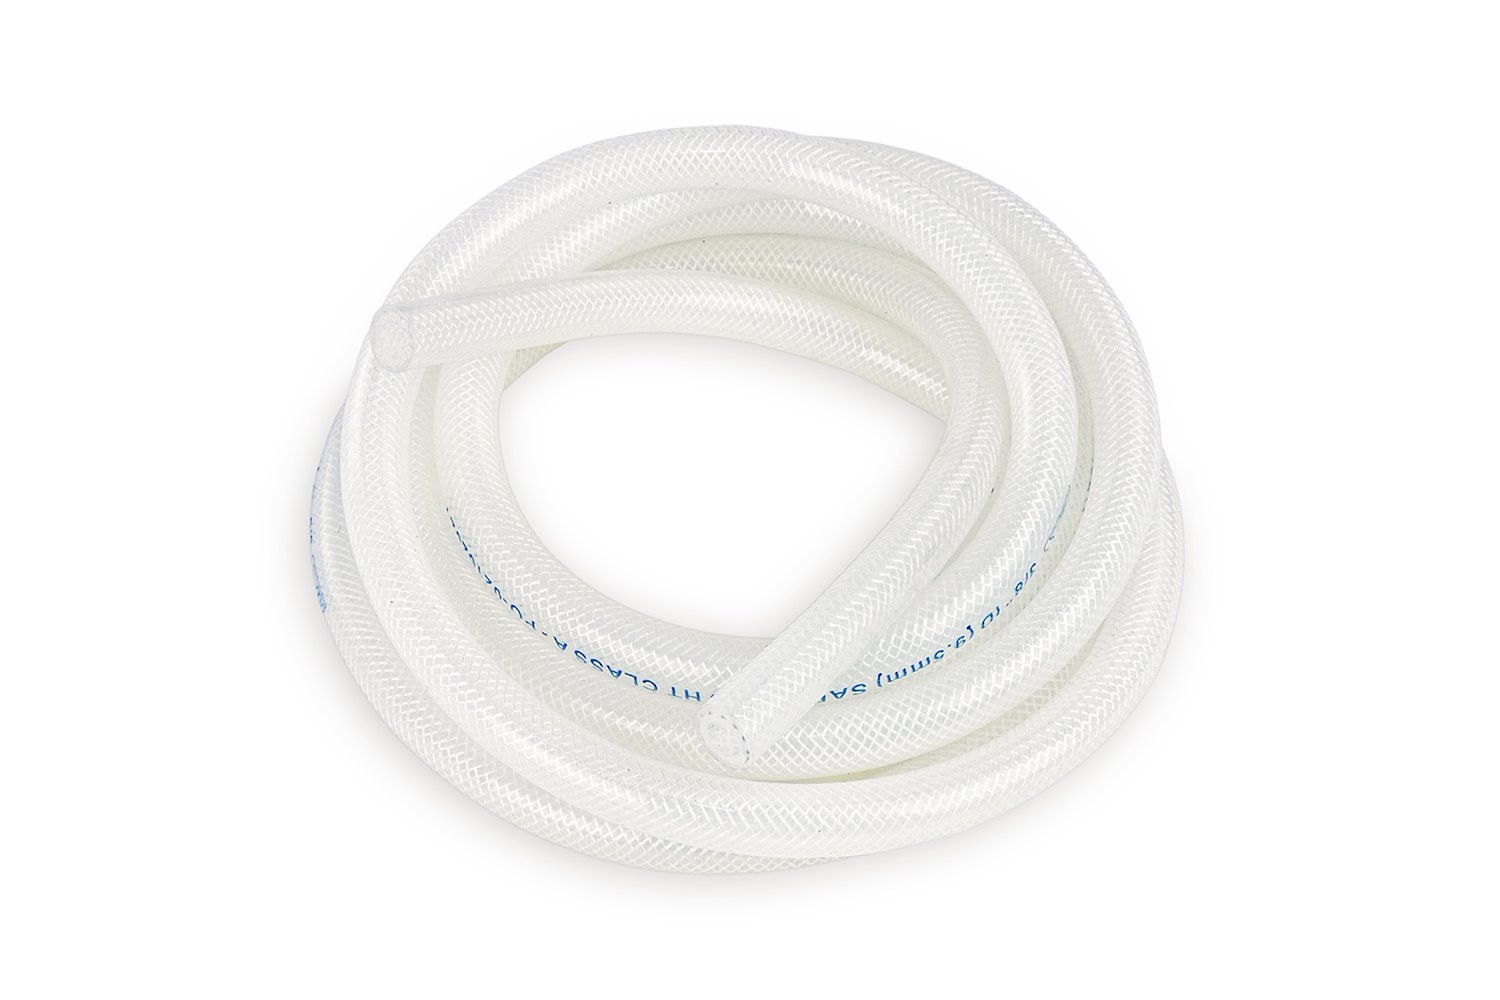 HTHH-016-CLEARx10 Silicone Heater Hose Tubing, High-Temp Reinforced, 5/32 in. ID, 10 ft. Roll, Clear